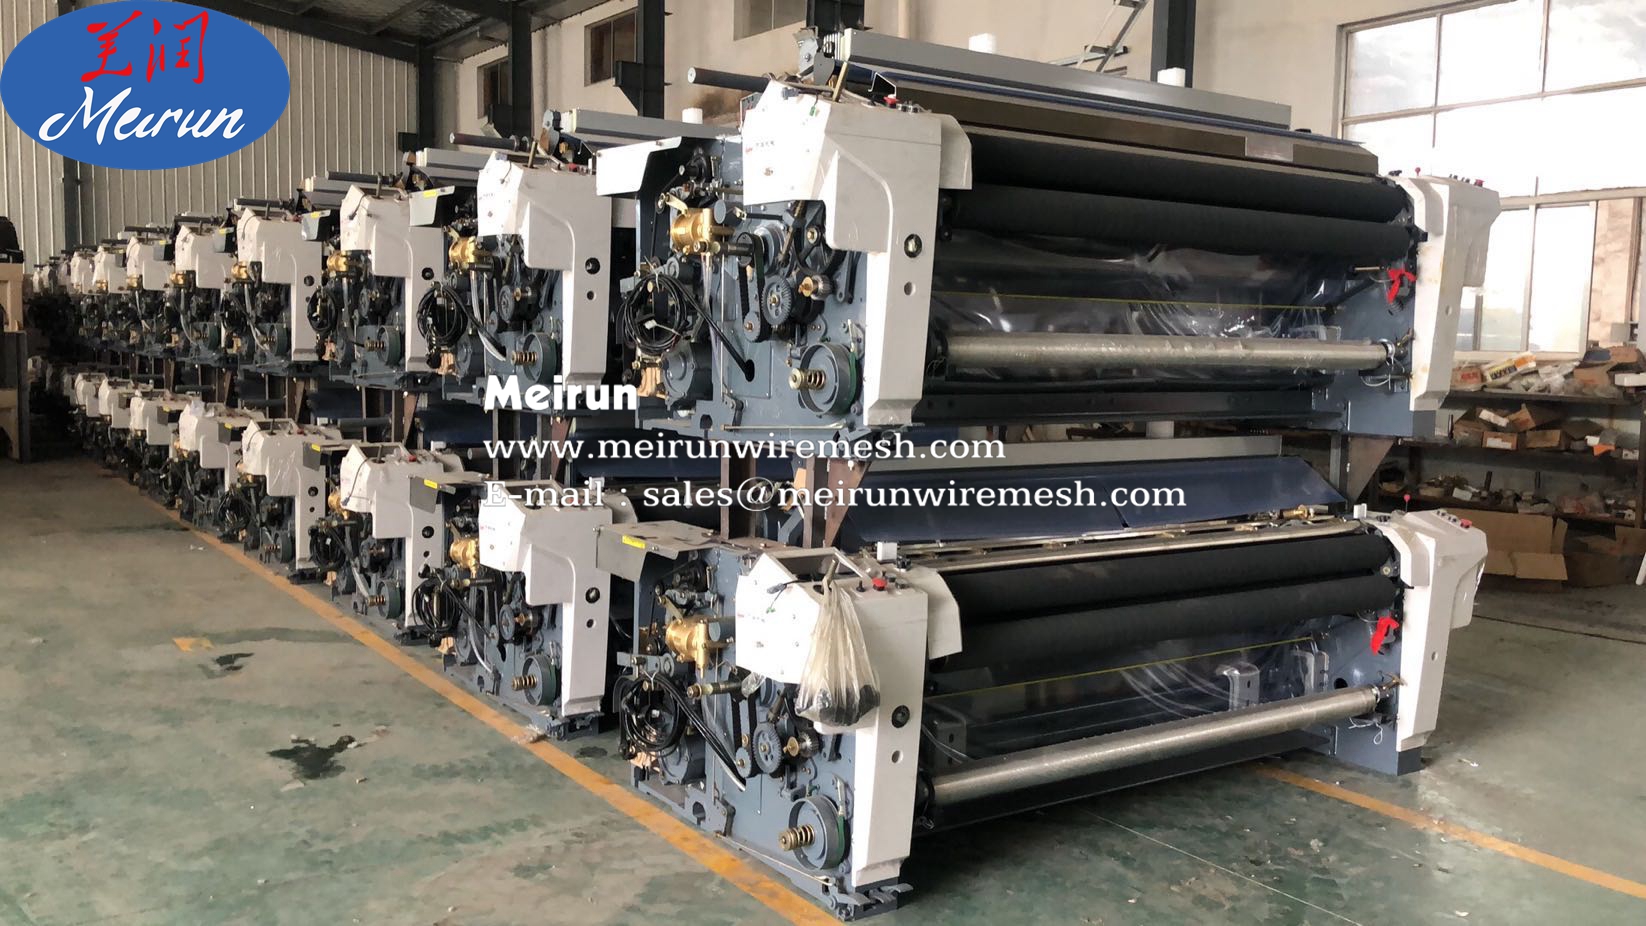 Water Weaving Machine Plastic Wire Used for Produce Windown Screening 